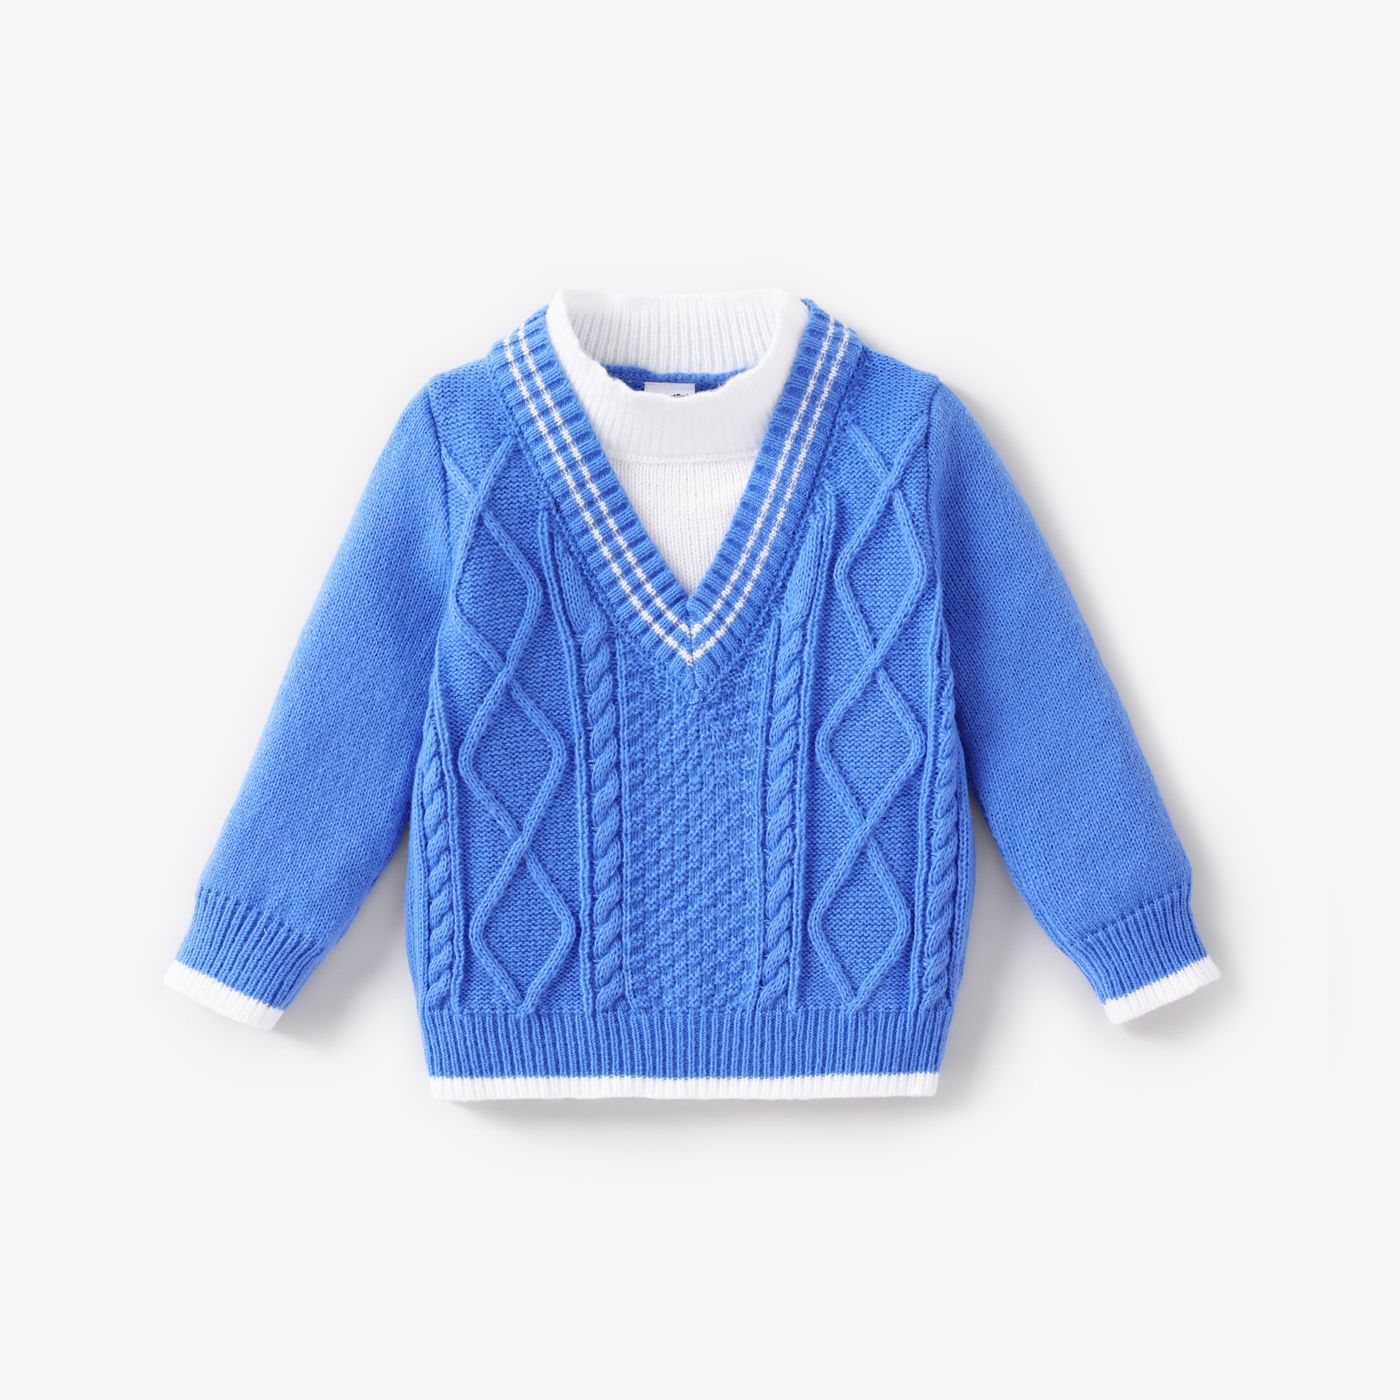 Toddler Boy Solid Color Avant-Garde Faux-Layered Sweater/Top